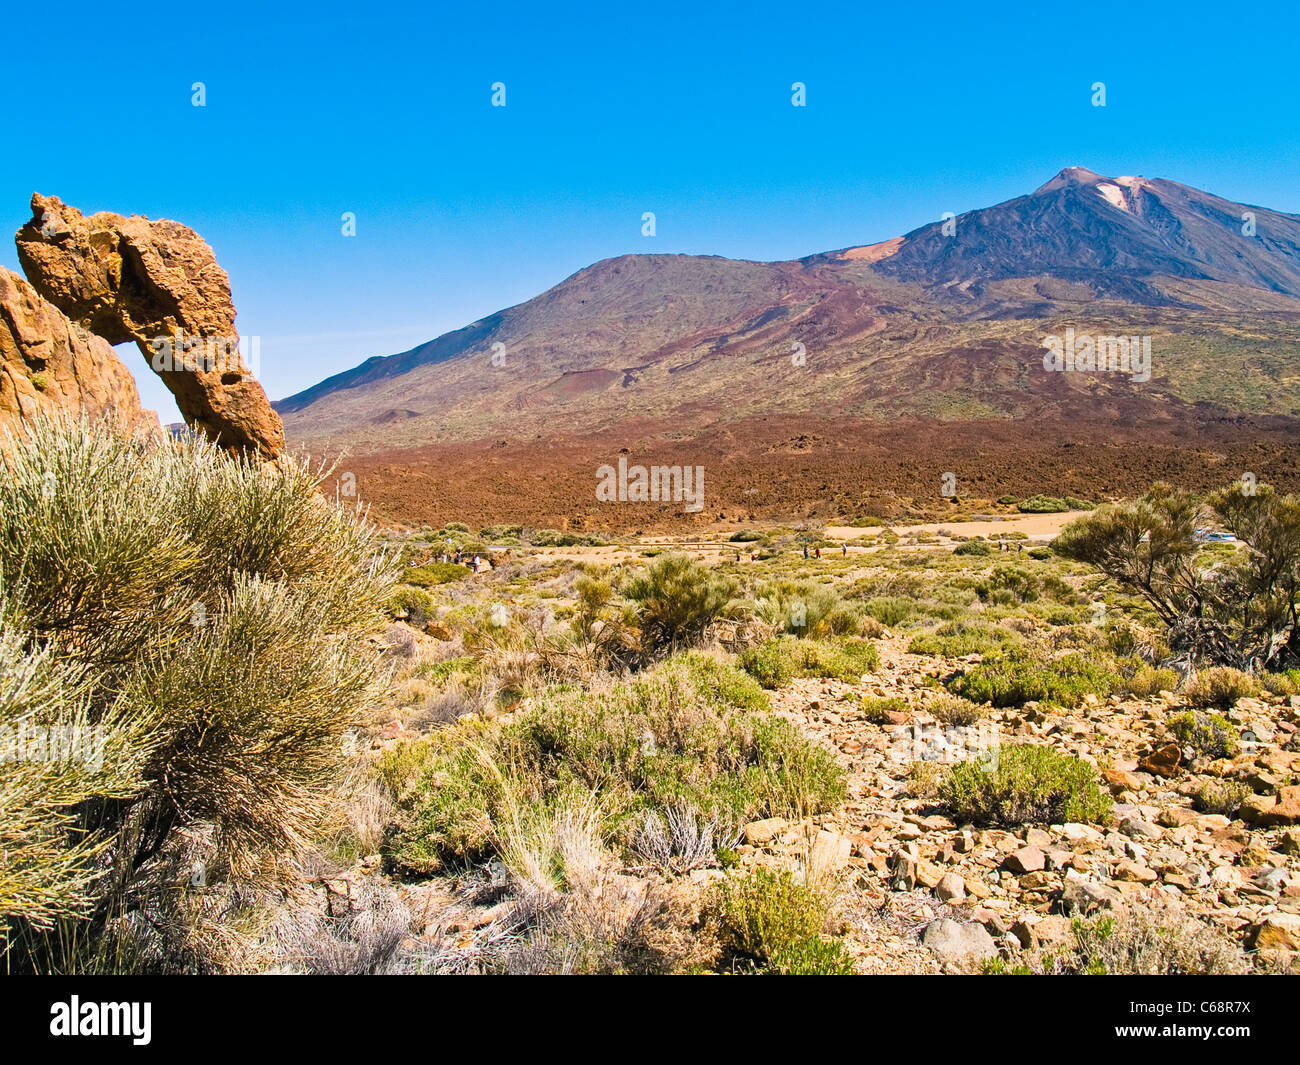 Rock and Mount Teide in the national park Tenerife, Canary Islands Spain Europe Stock Photo